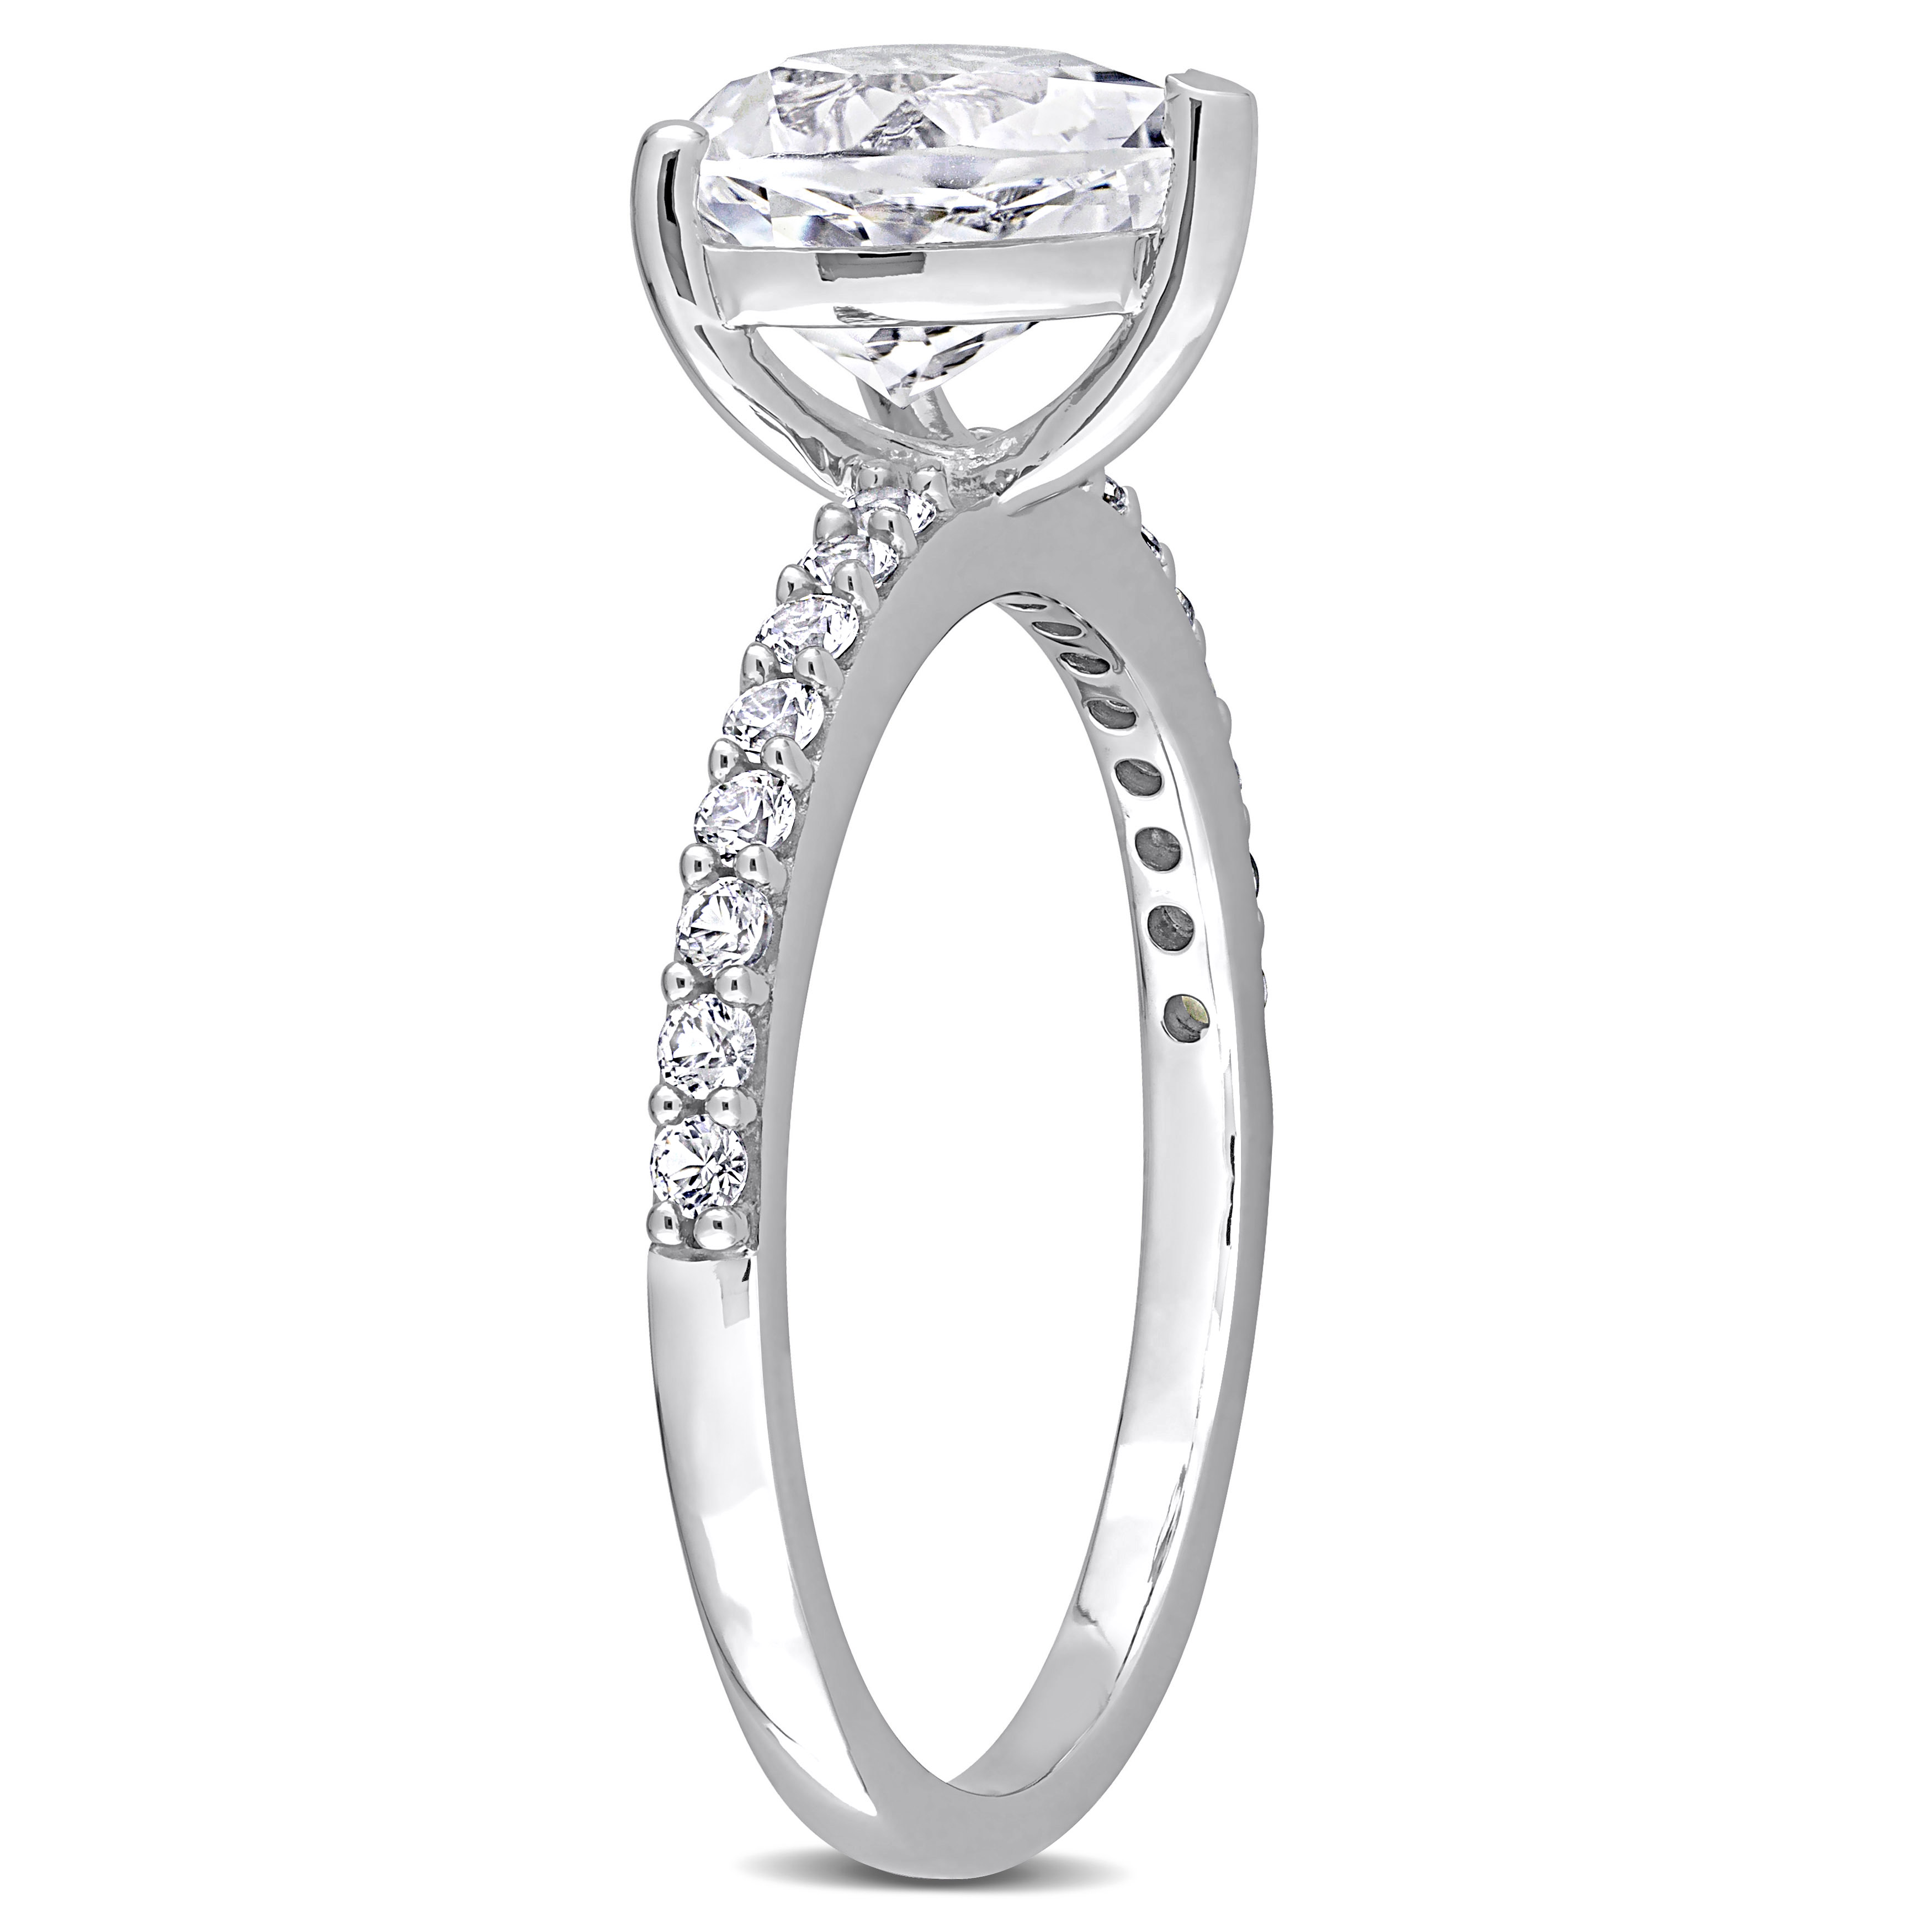 2 3/5 CT TGW Heart Shape Created White Sapphire Solitaire Engagement Ring in 10k White Gold